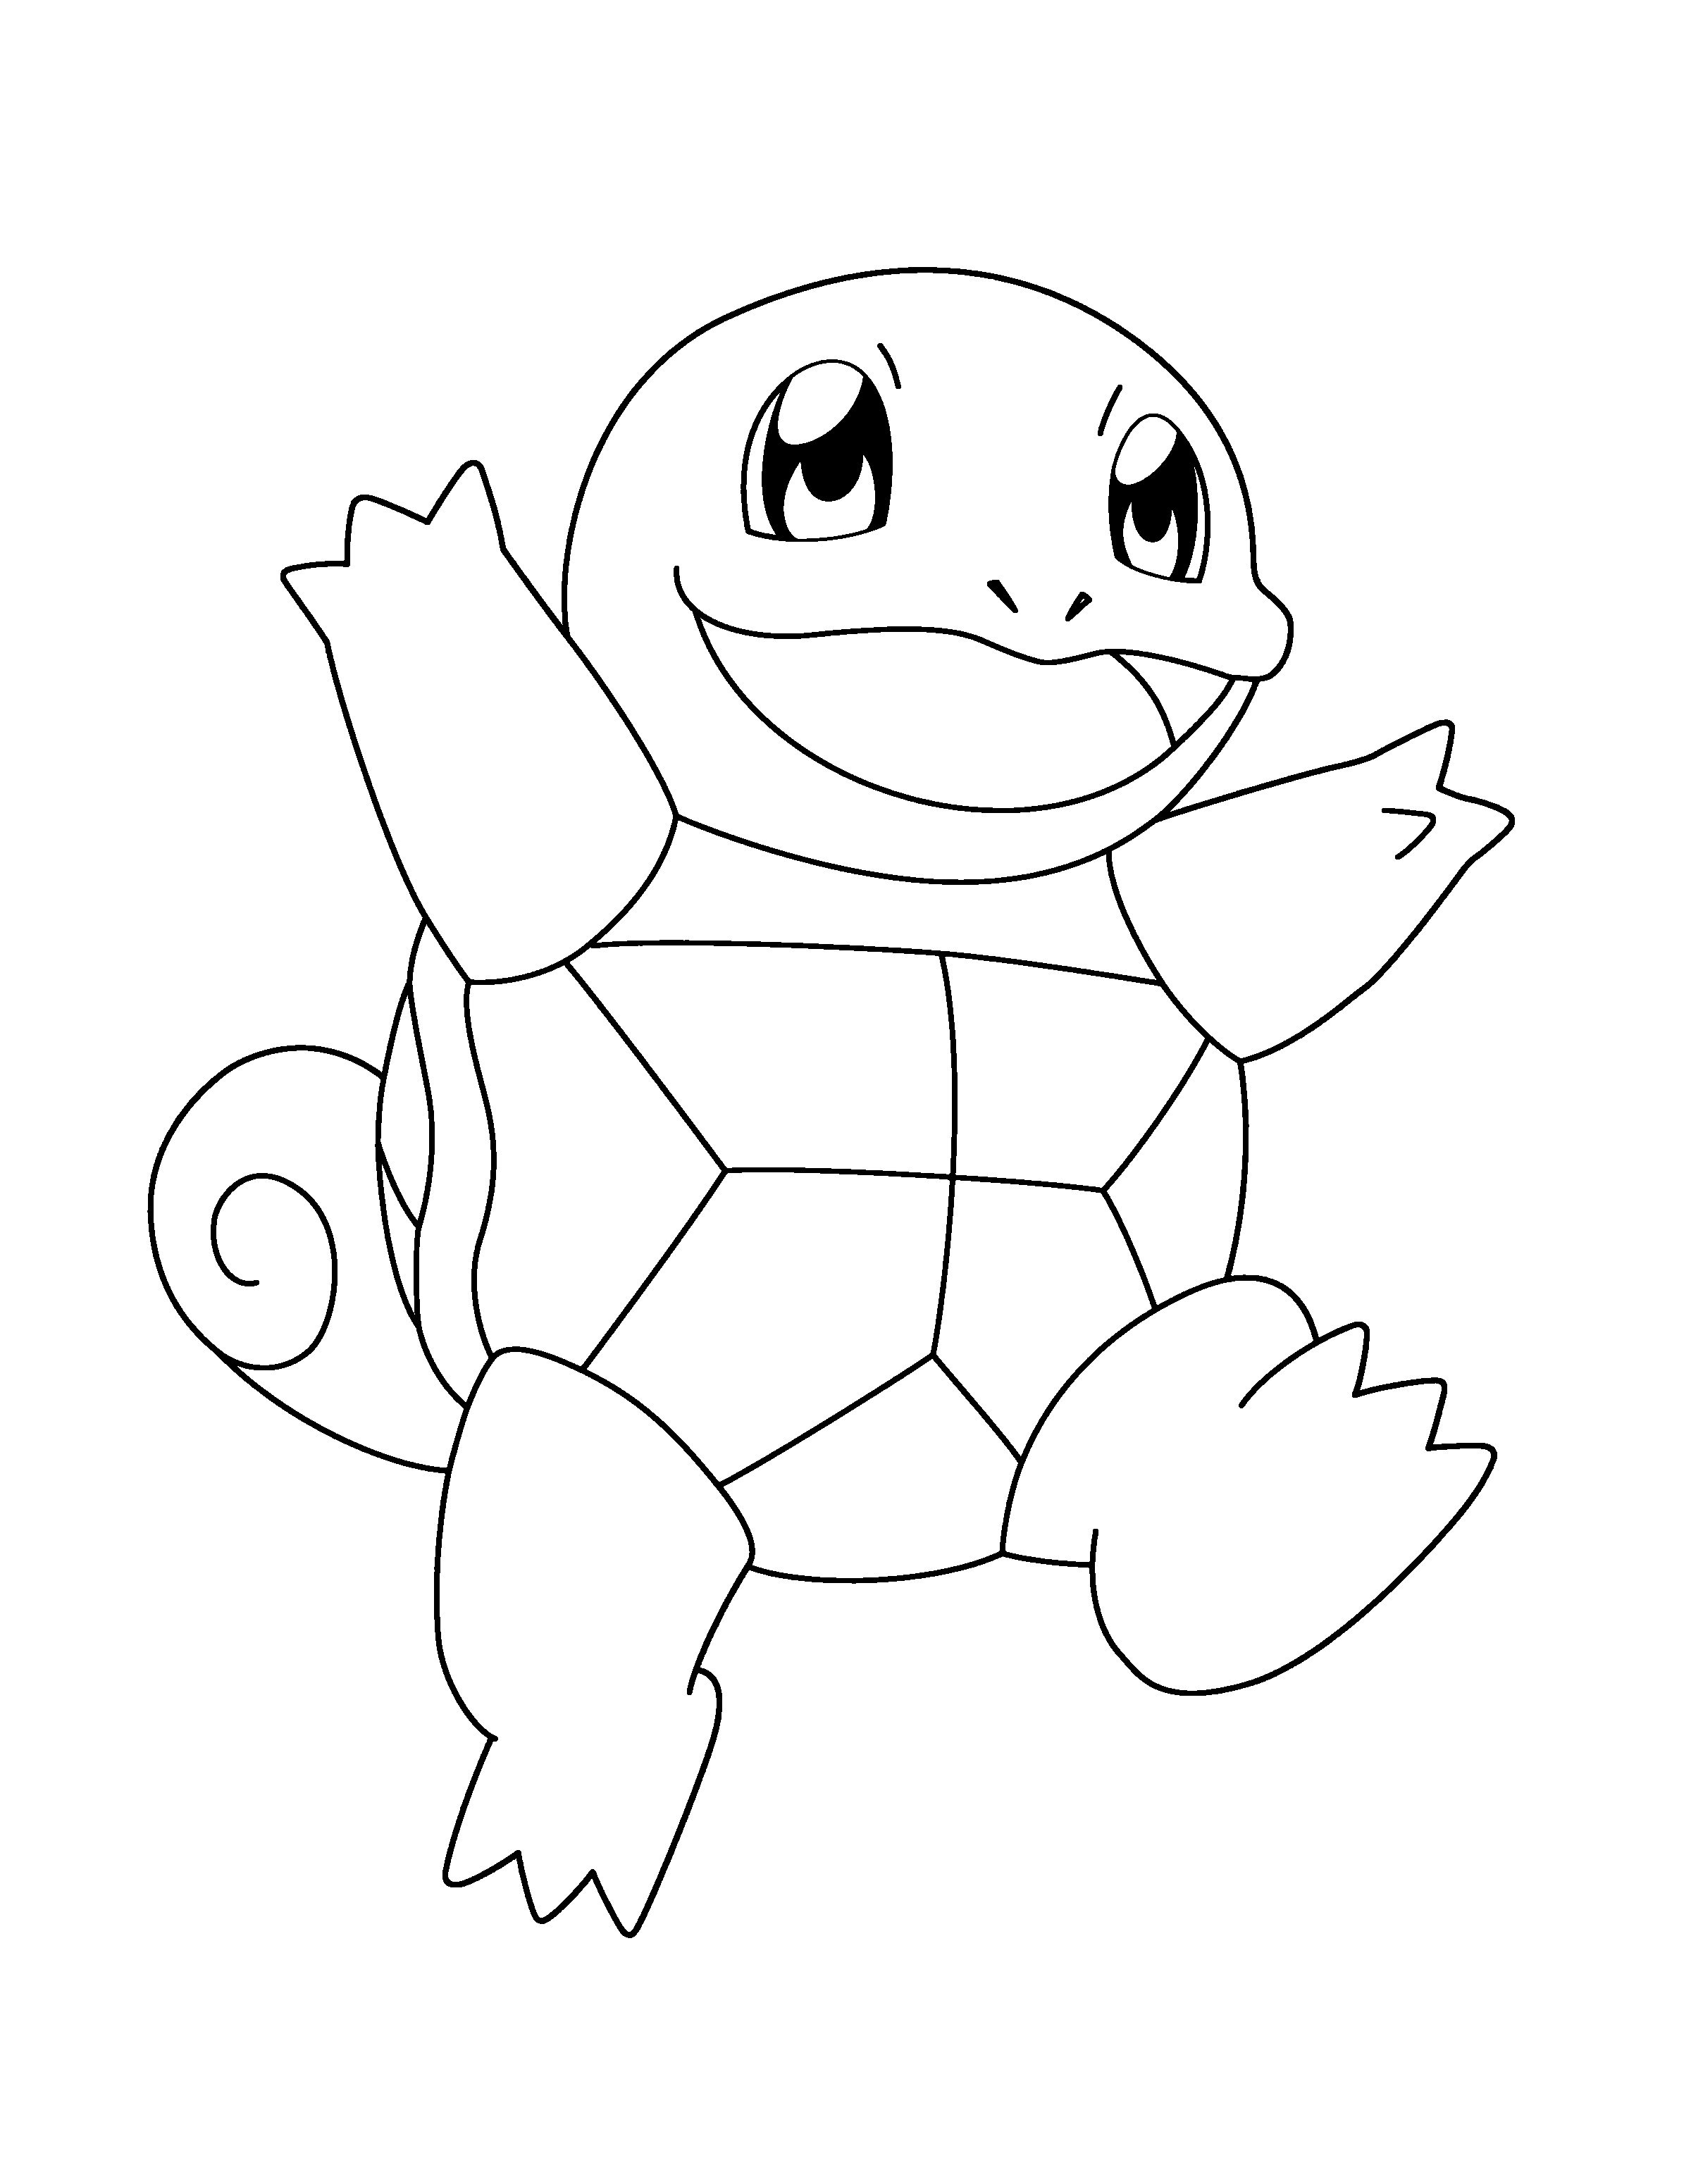 animated-coloring-pages-pokemon-image-0194